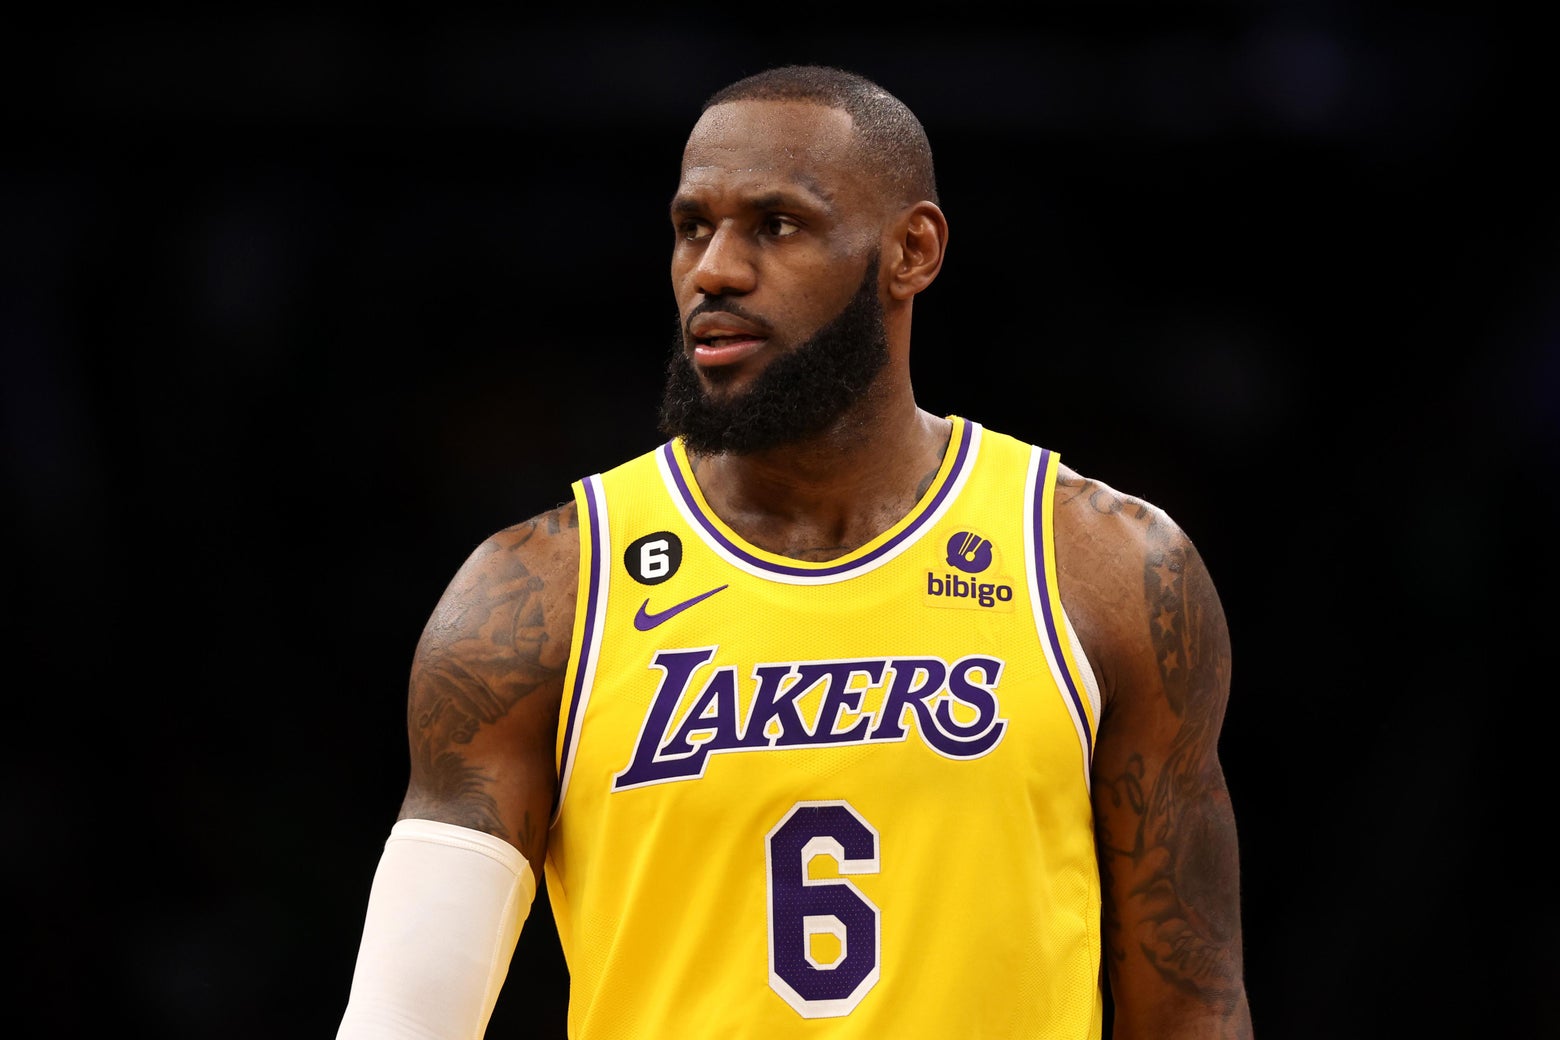 Lebron James: Without injured star, can the LA Lakers make the playoffs?  Here's how it could happen